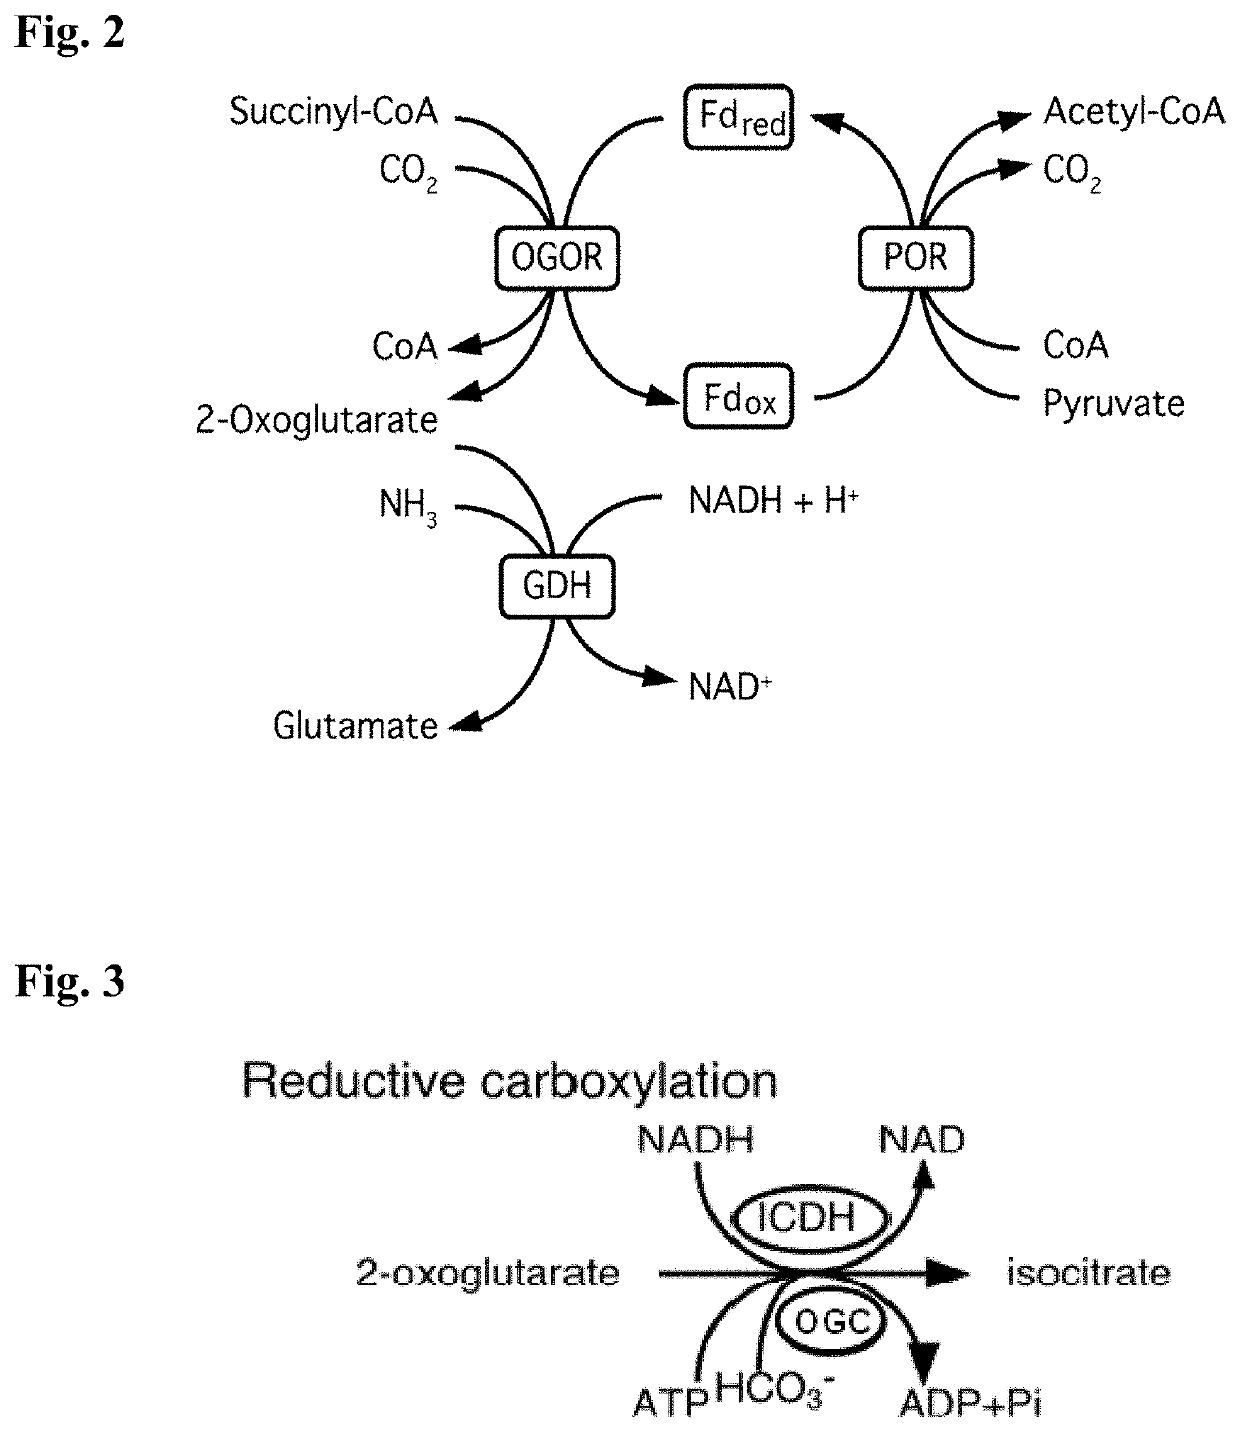 Synthetic pathway for biological carbon dioxide sequestration